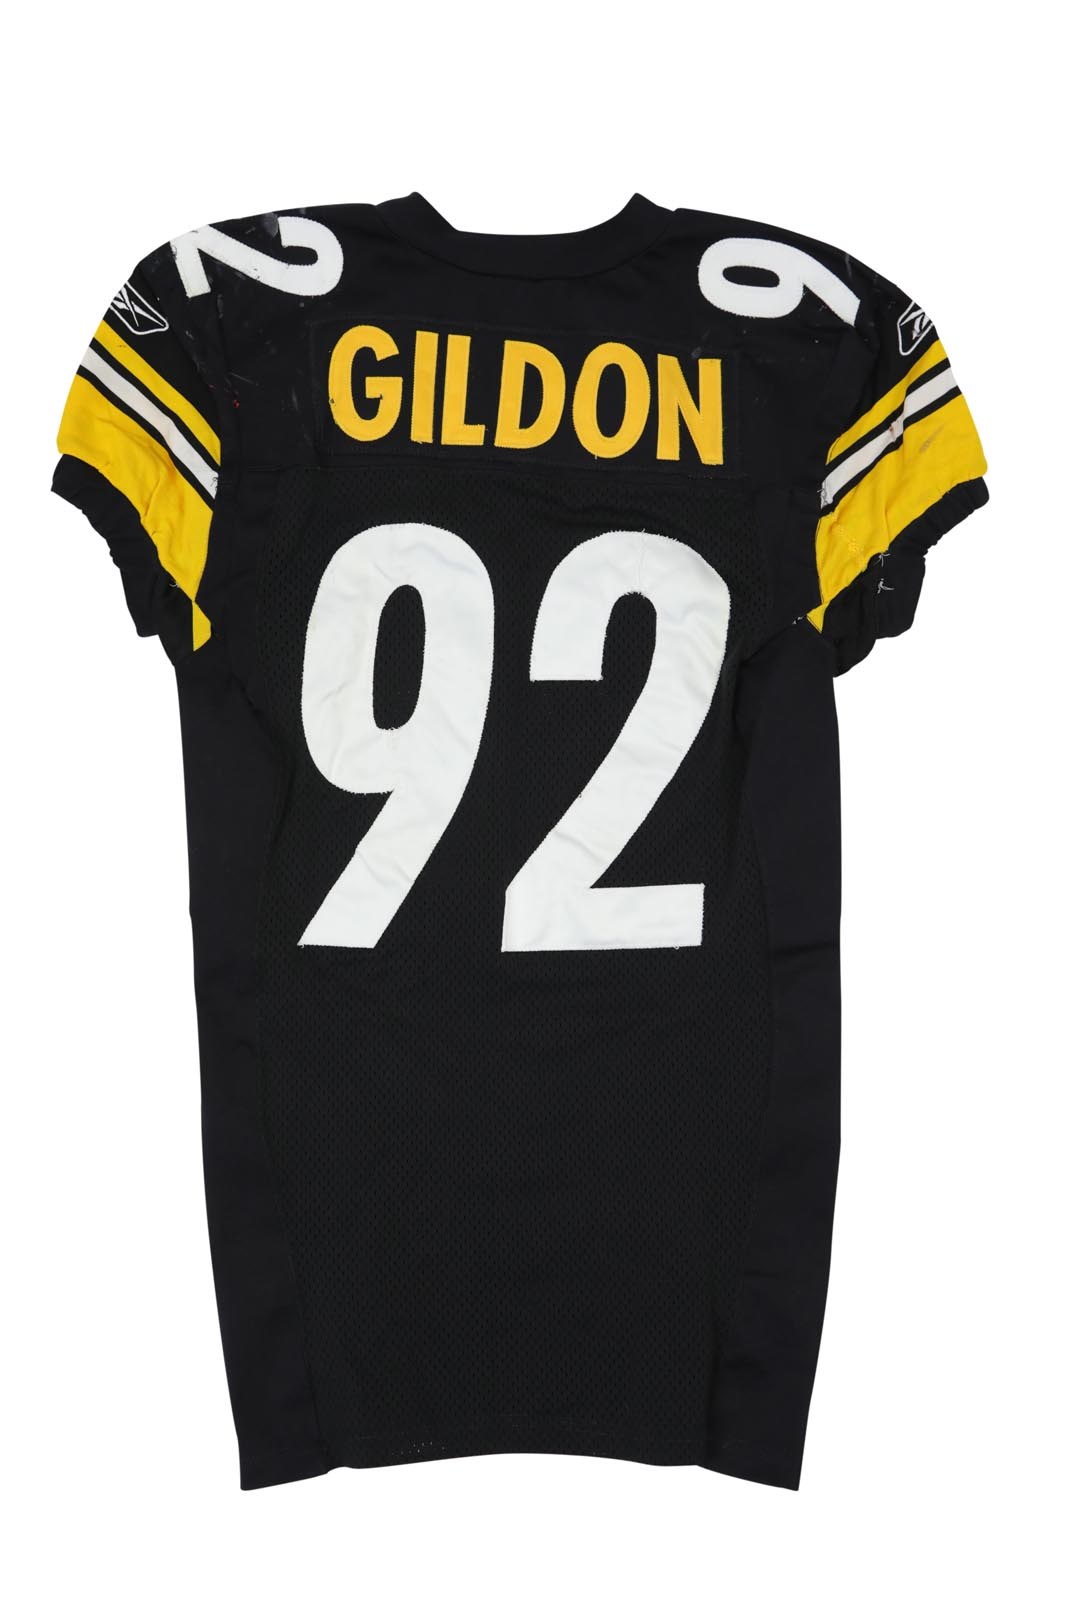 The Pittsburgh Steelers Game Worn Jersey Archive - 2001 Jason Gildon Game Used Pittsburgh Steelers Jersey - Including AFC Playoffs (Photo-Matched to Five Games, Steelers COA)